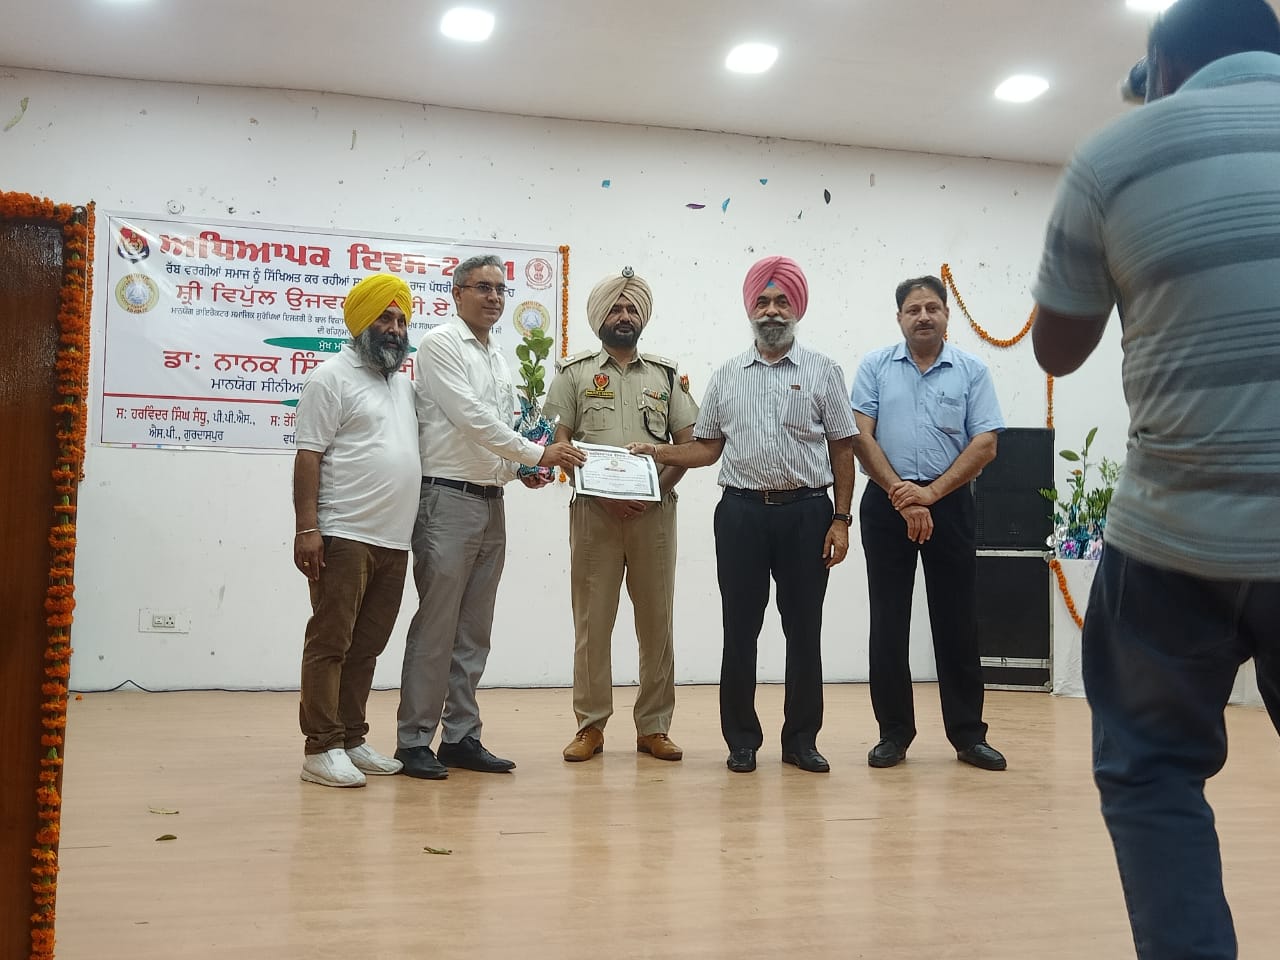 Dr. Amit Jarewal, MBBS PGDCC, Aesthetic & Laser Expert honors by Sh. Vipul Ujwal, I. A. S. Director, Social Security Women and Child Development.